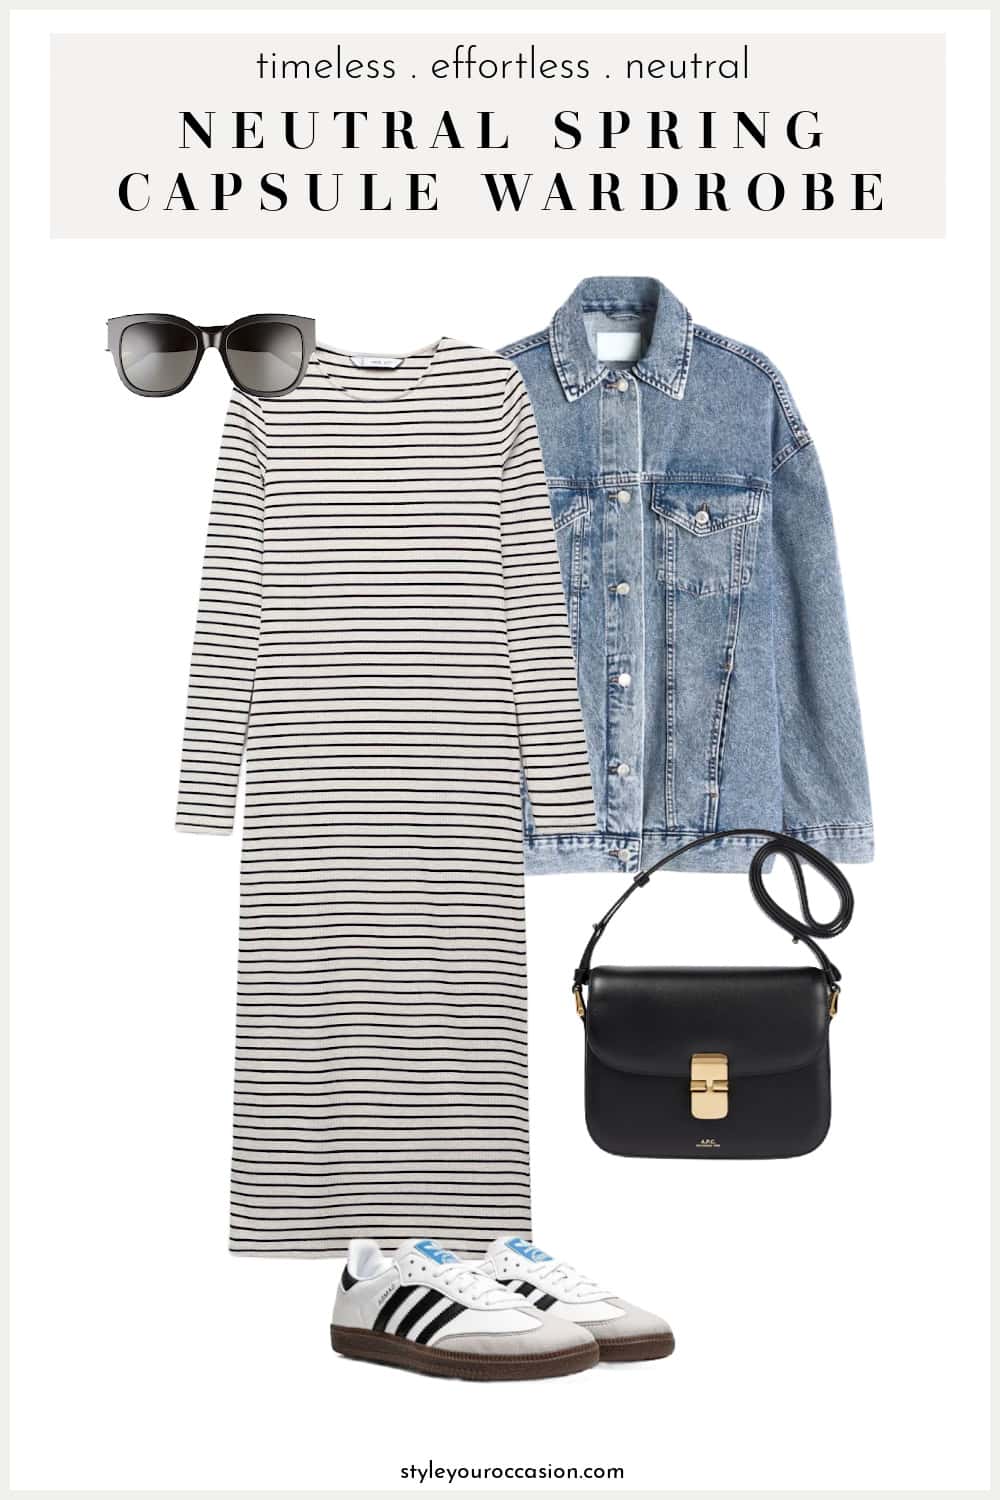 outfit image of an oversized denim and casual striped shirt dress with sneakers and a black purse for a spring capsule wardrobe outfit